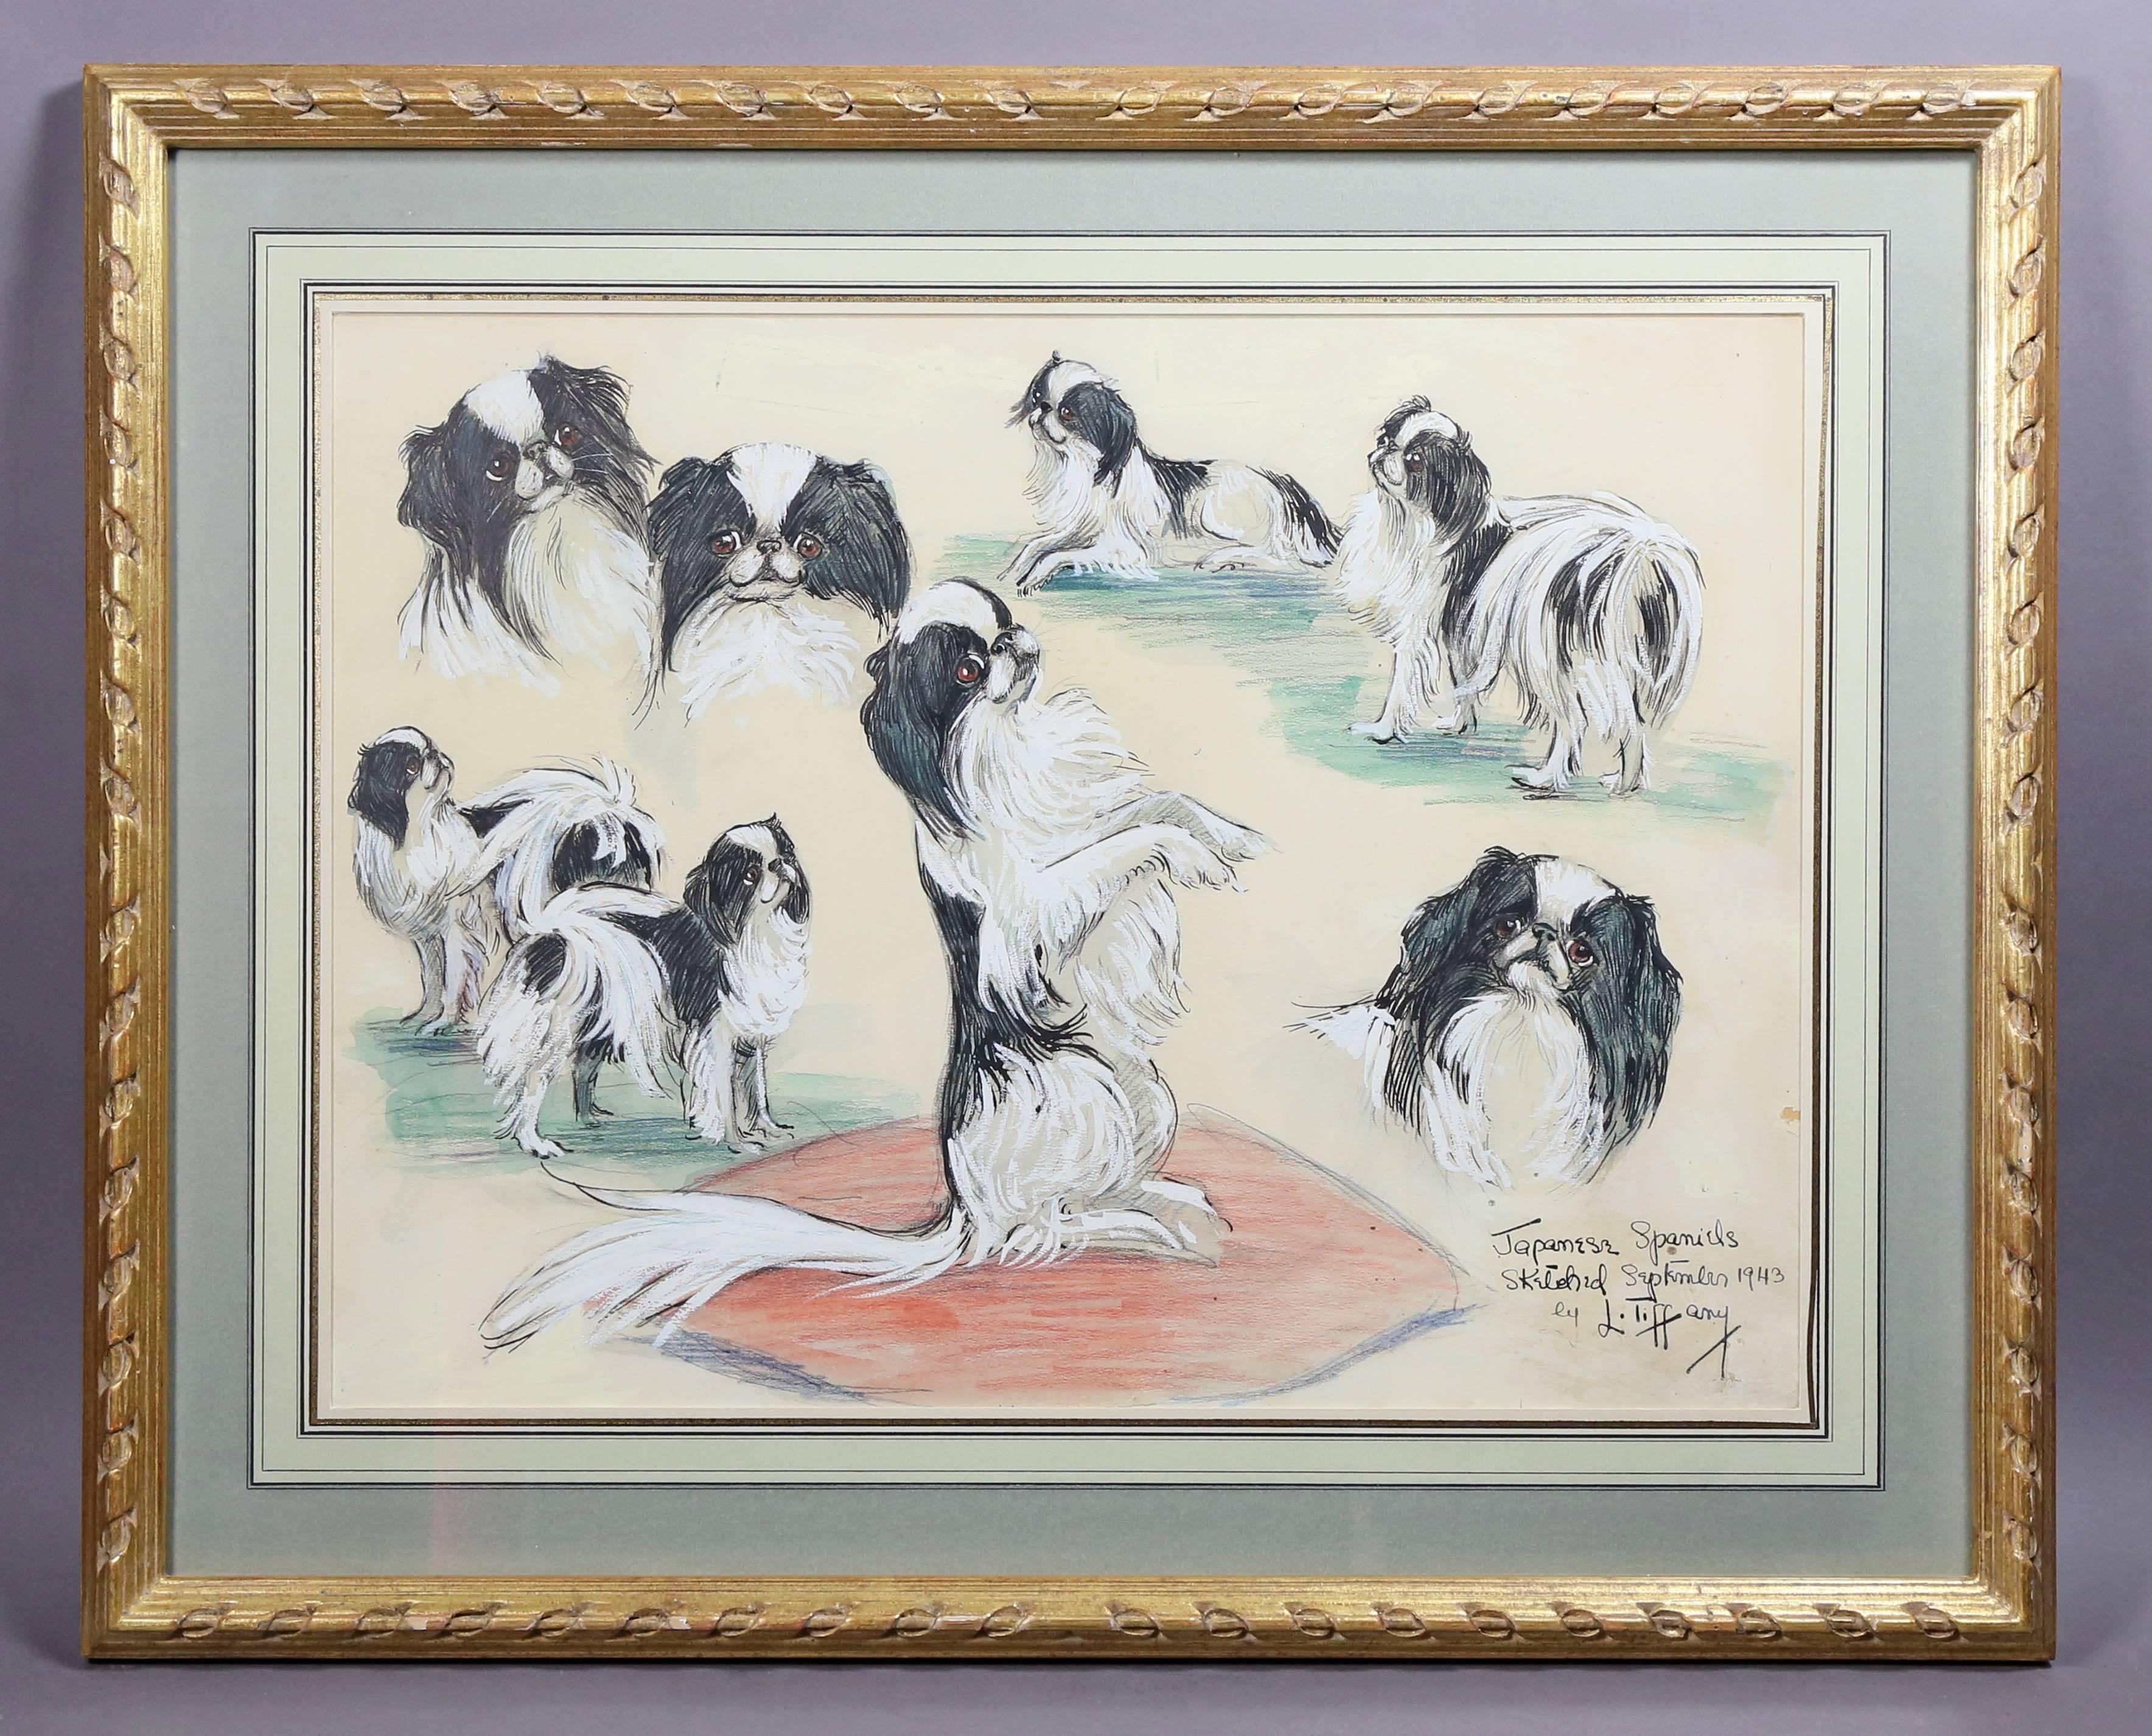 Three Framed Crayon and Pastel Pictures, Japanese Spaniels, Lillian Tiffany, Set 1